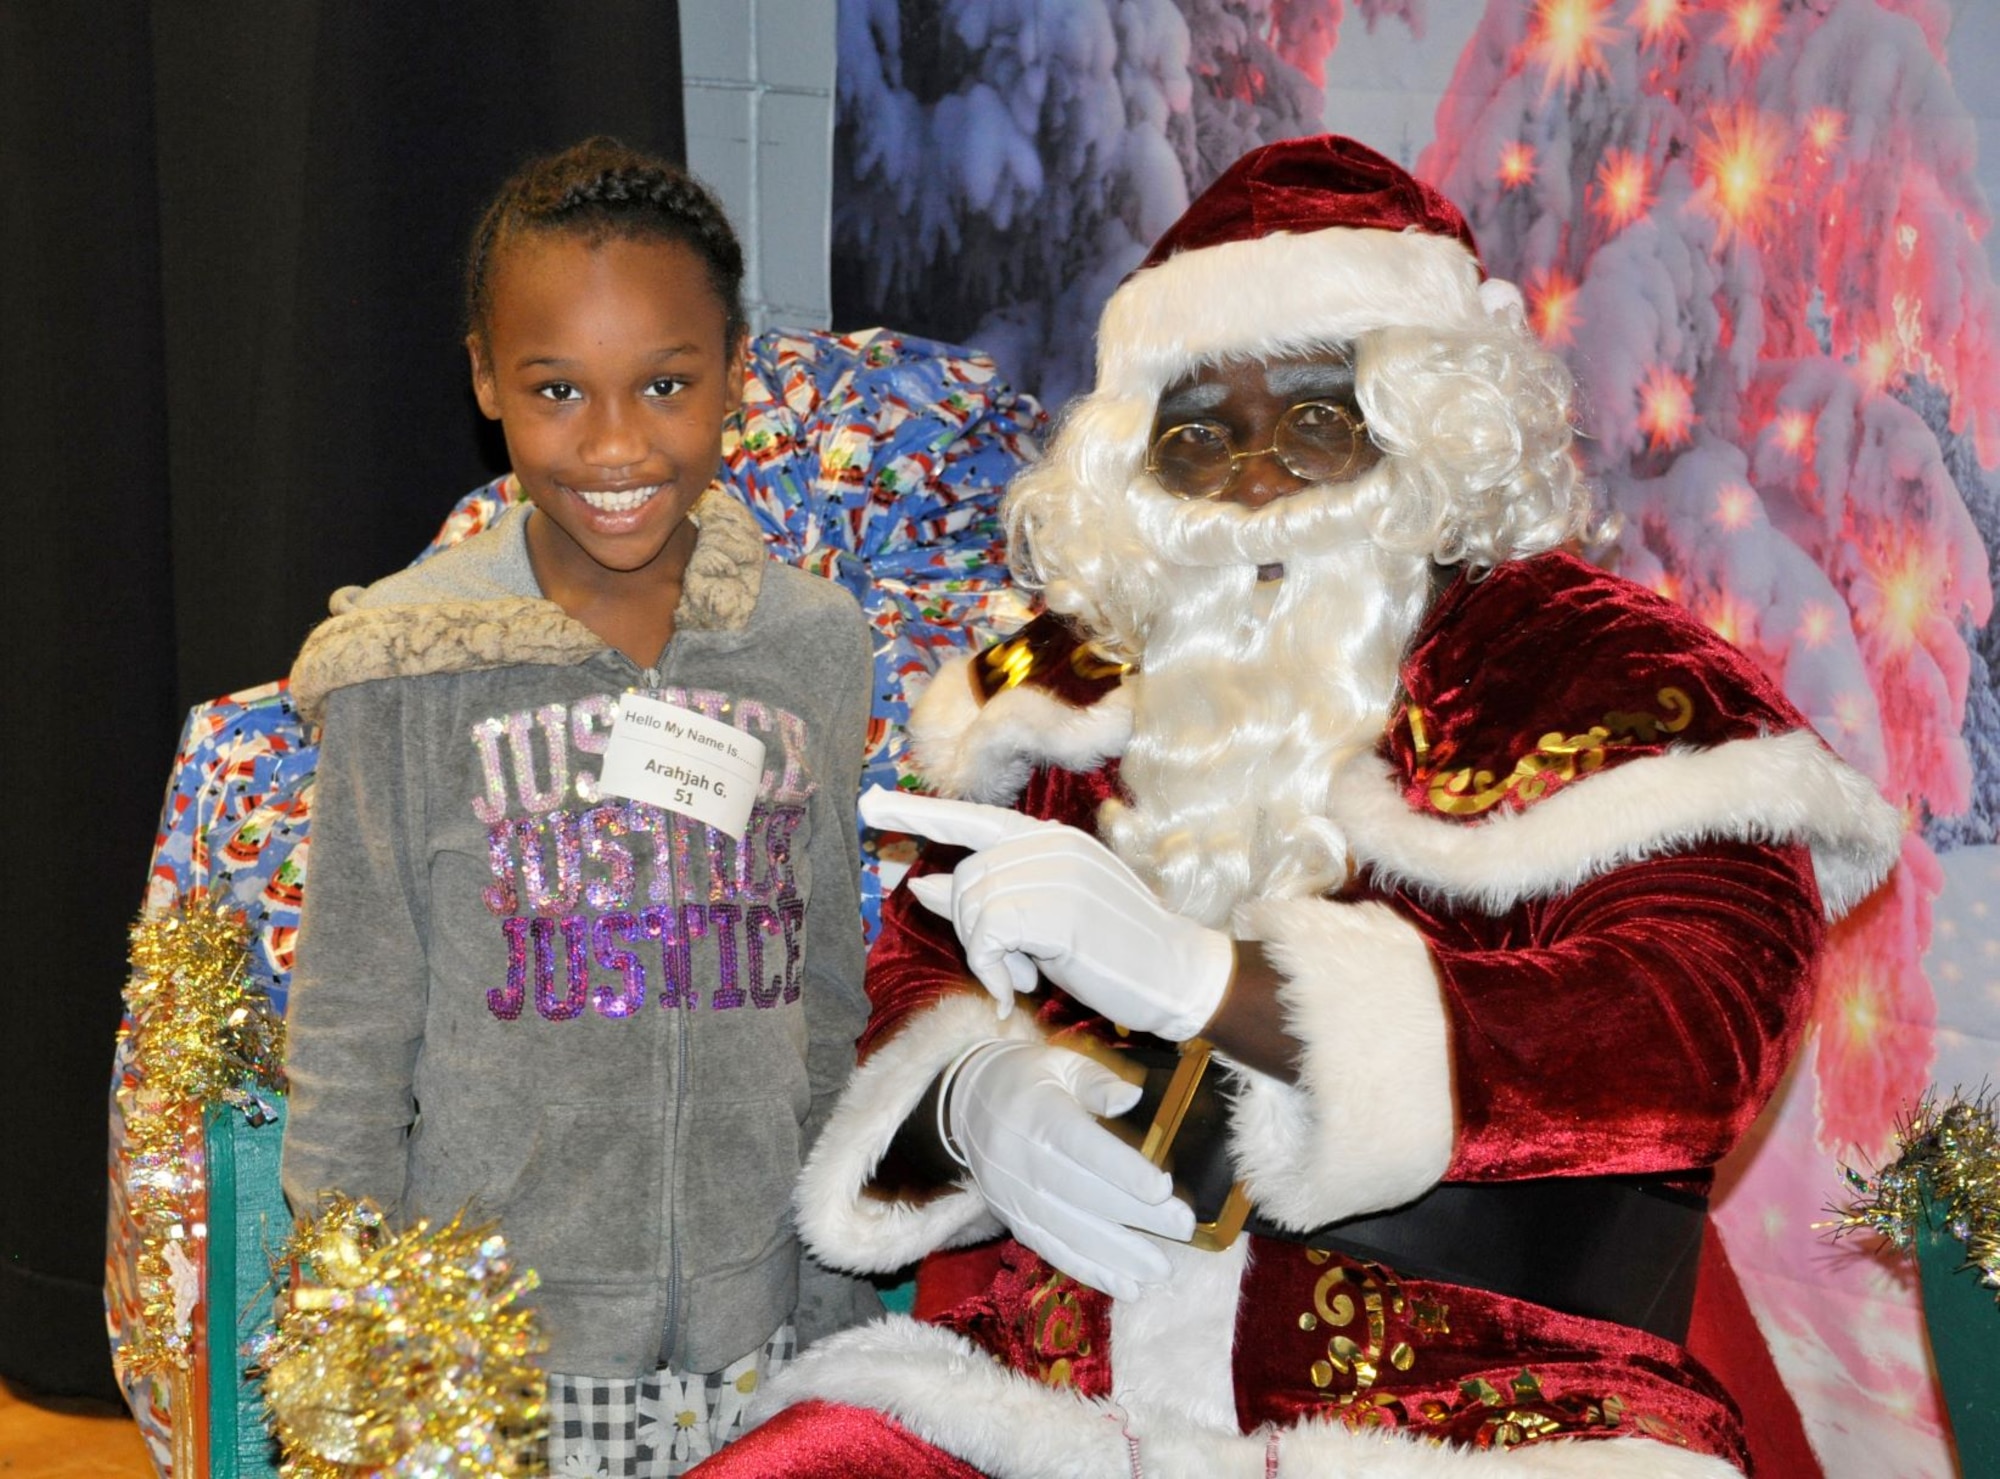 A student visits with Santa Claus Dec. 19 during the annual “Spread the Joy” event sponsored by the Air Force Civil Engineer Center Emergency Management team from Tyndall Air Force Base, Fla.